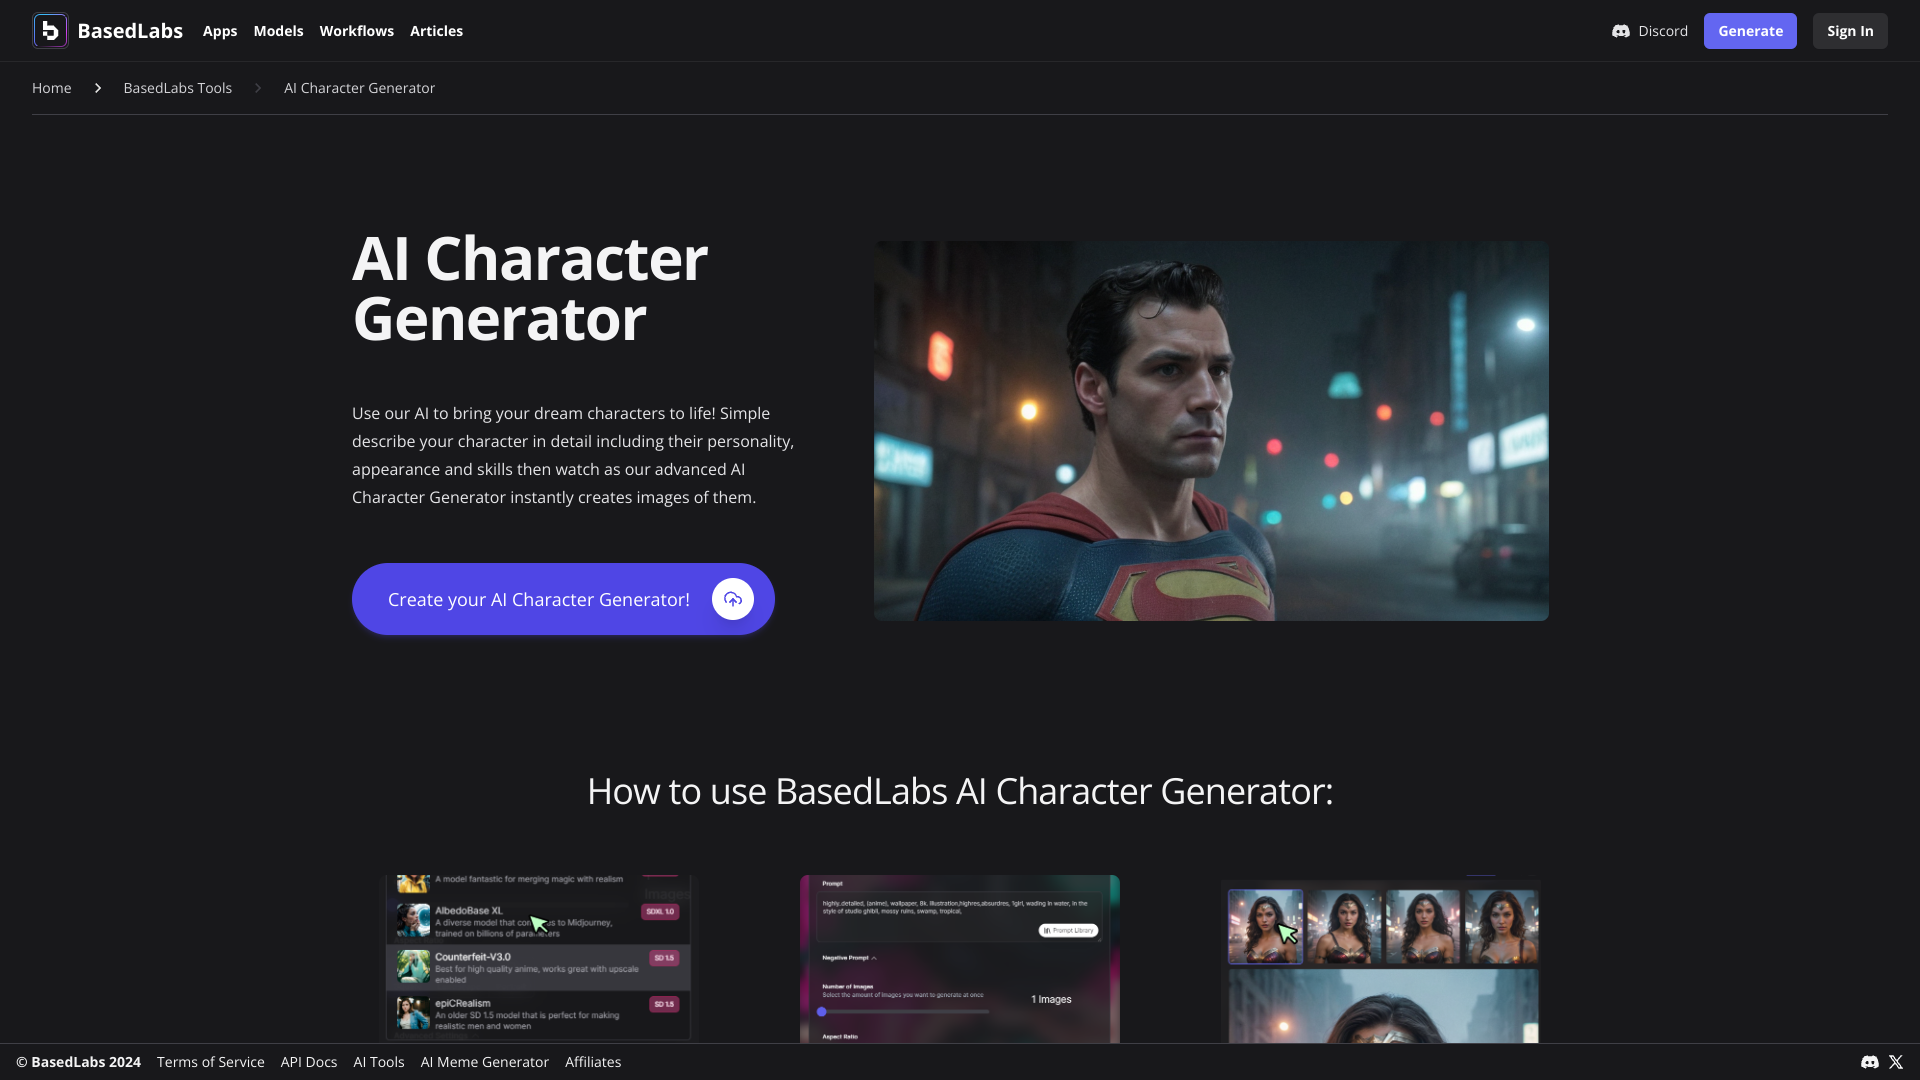 Display image for AI Character Generator